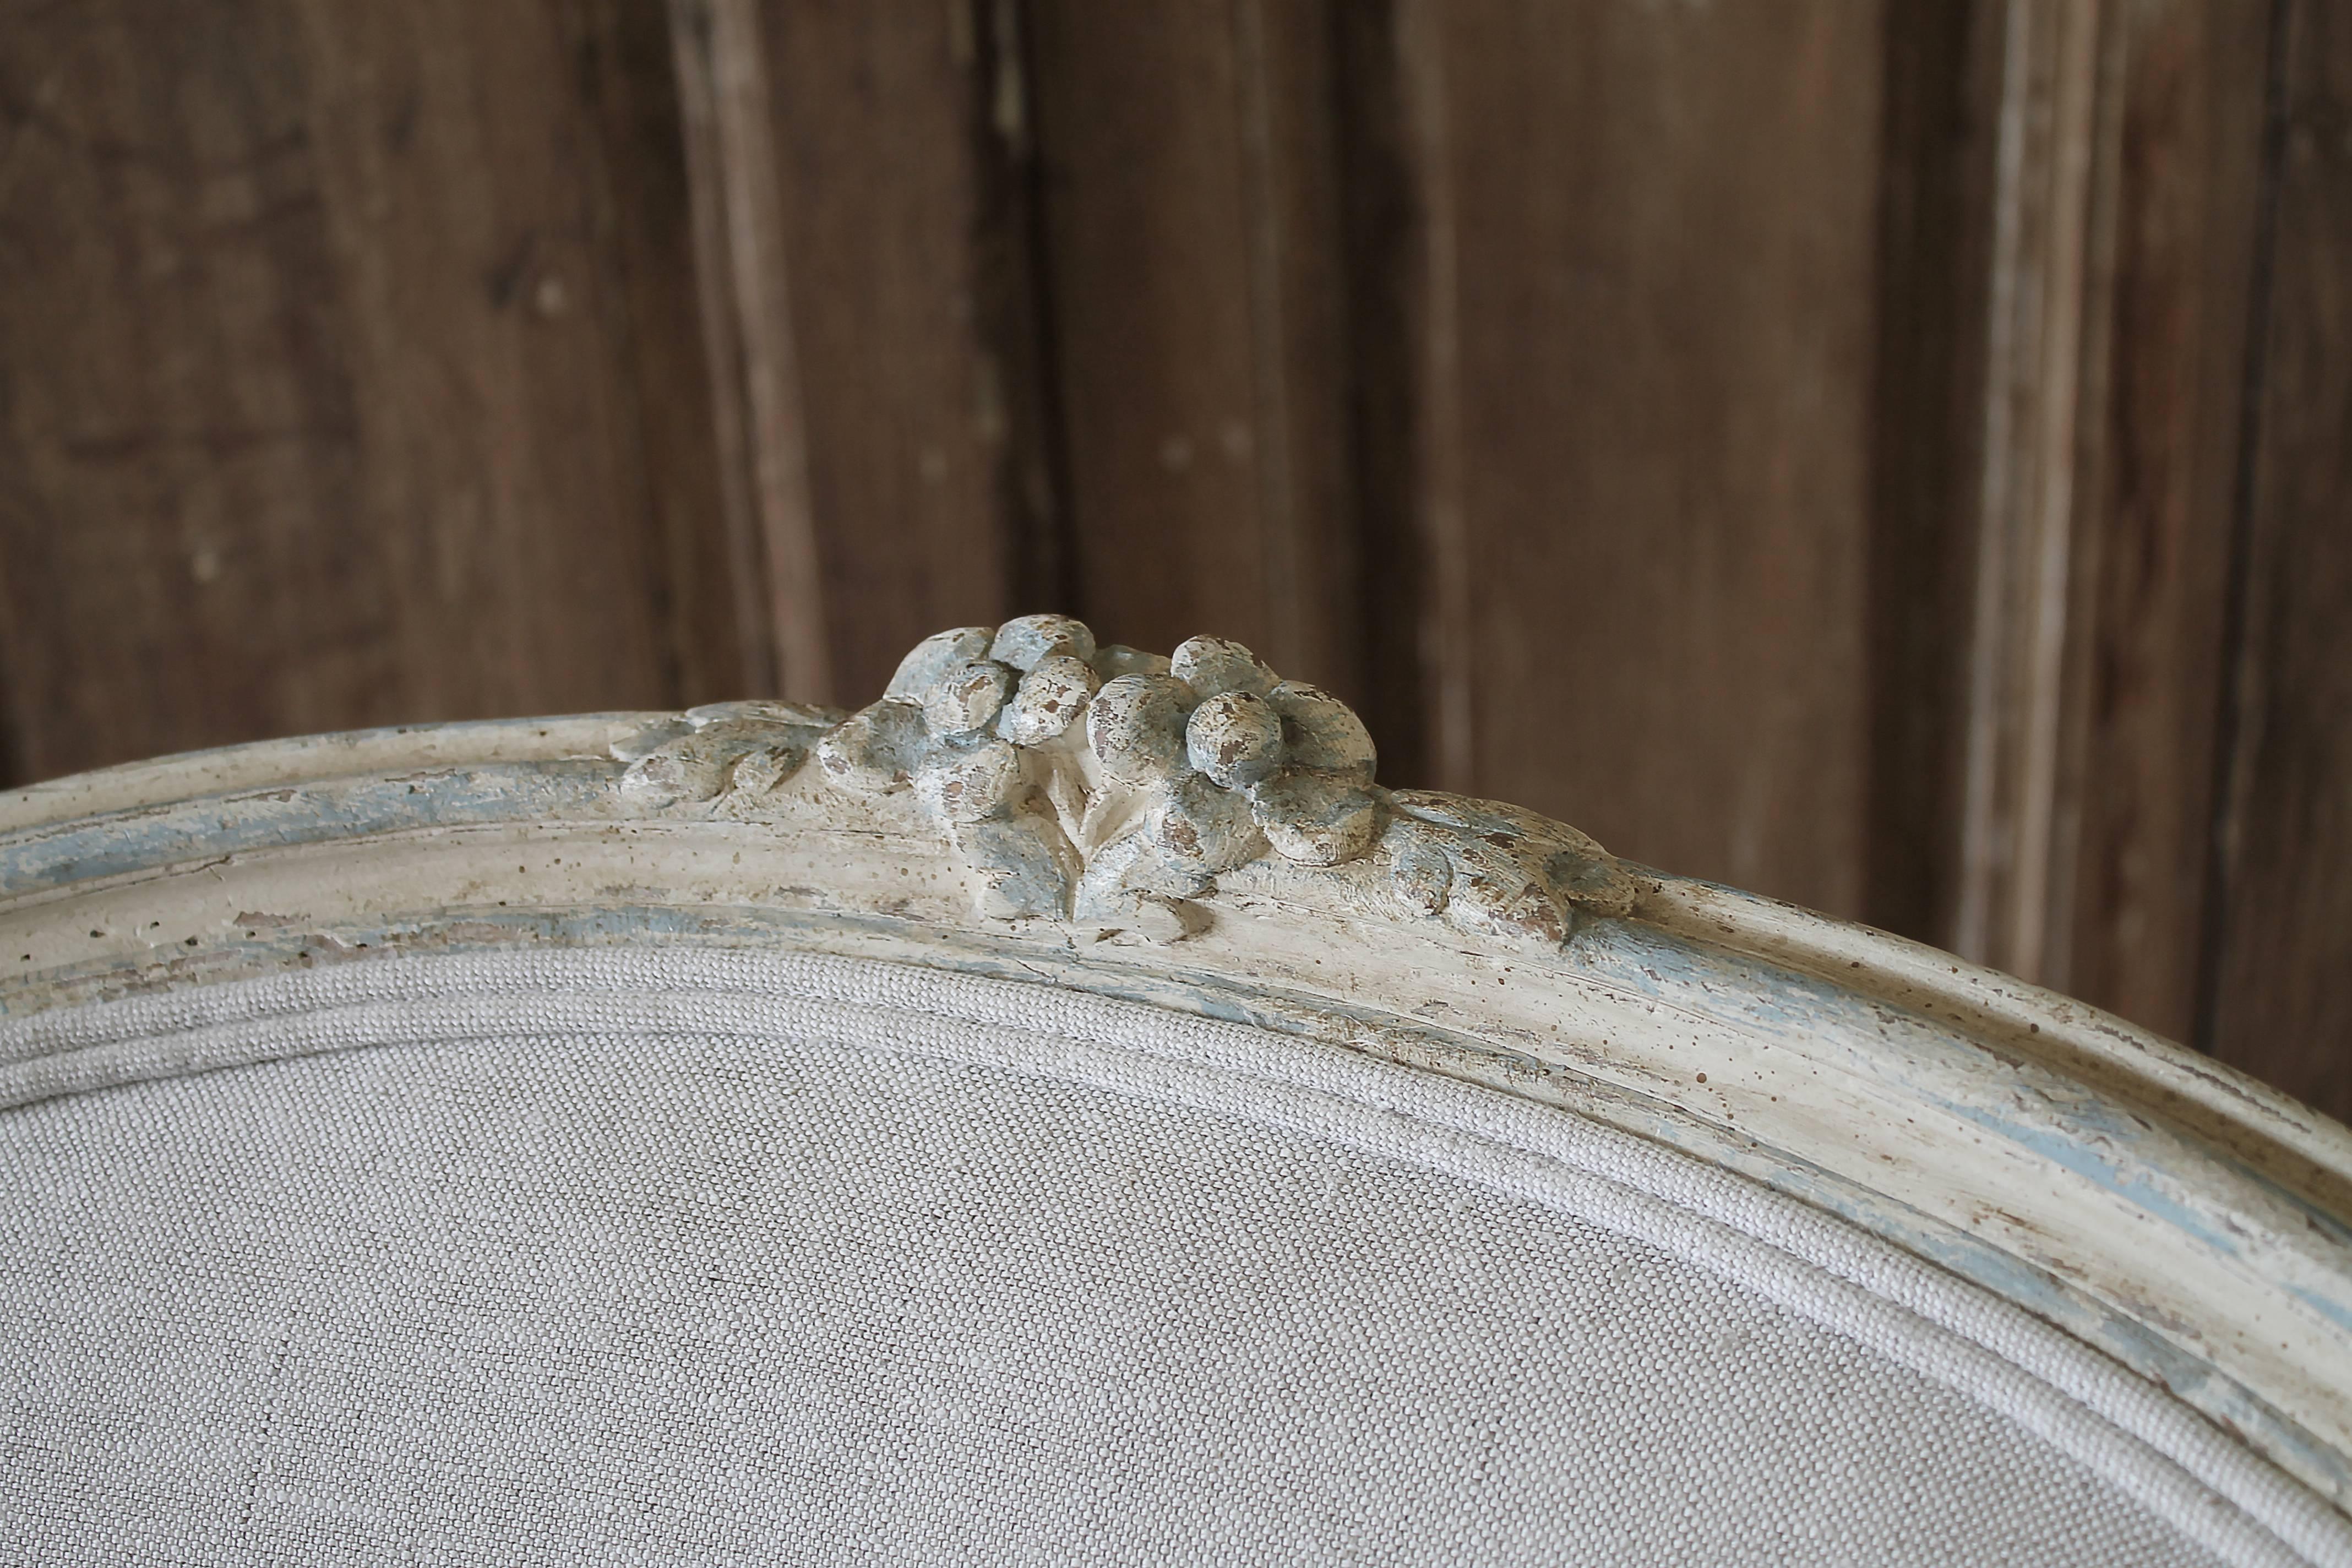 Early 20th century carved and painted bergere chair upholstered in natural linen
Original as found the painted bergere chair has a lovely patina painted finish in an off-white, almost creamy greige color, with pale blue painted tones peeking